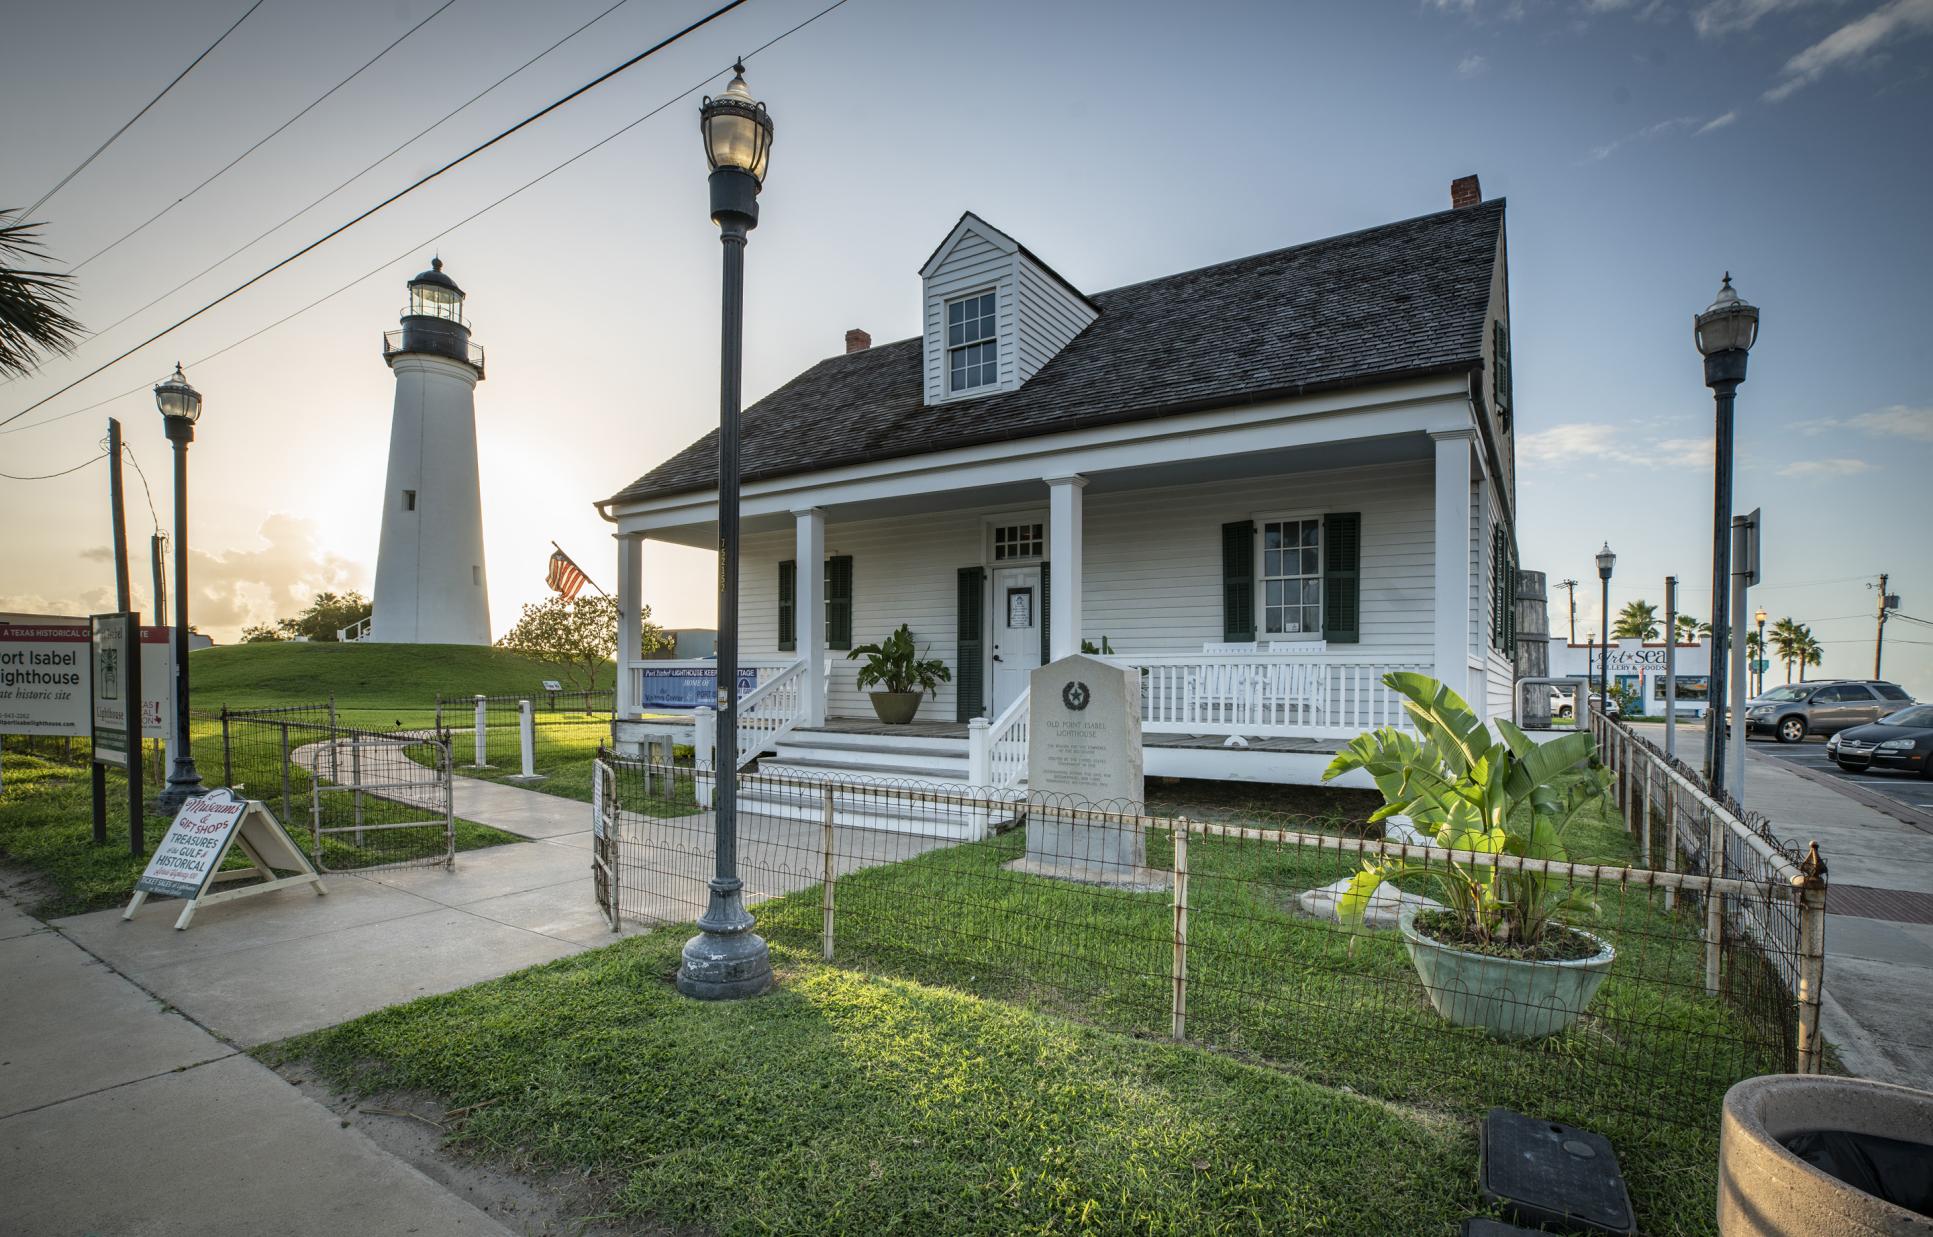 Lightkeeper's house at the Port Isabel Lighthouse site